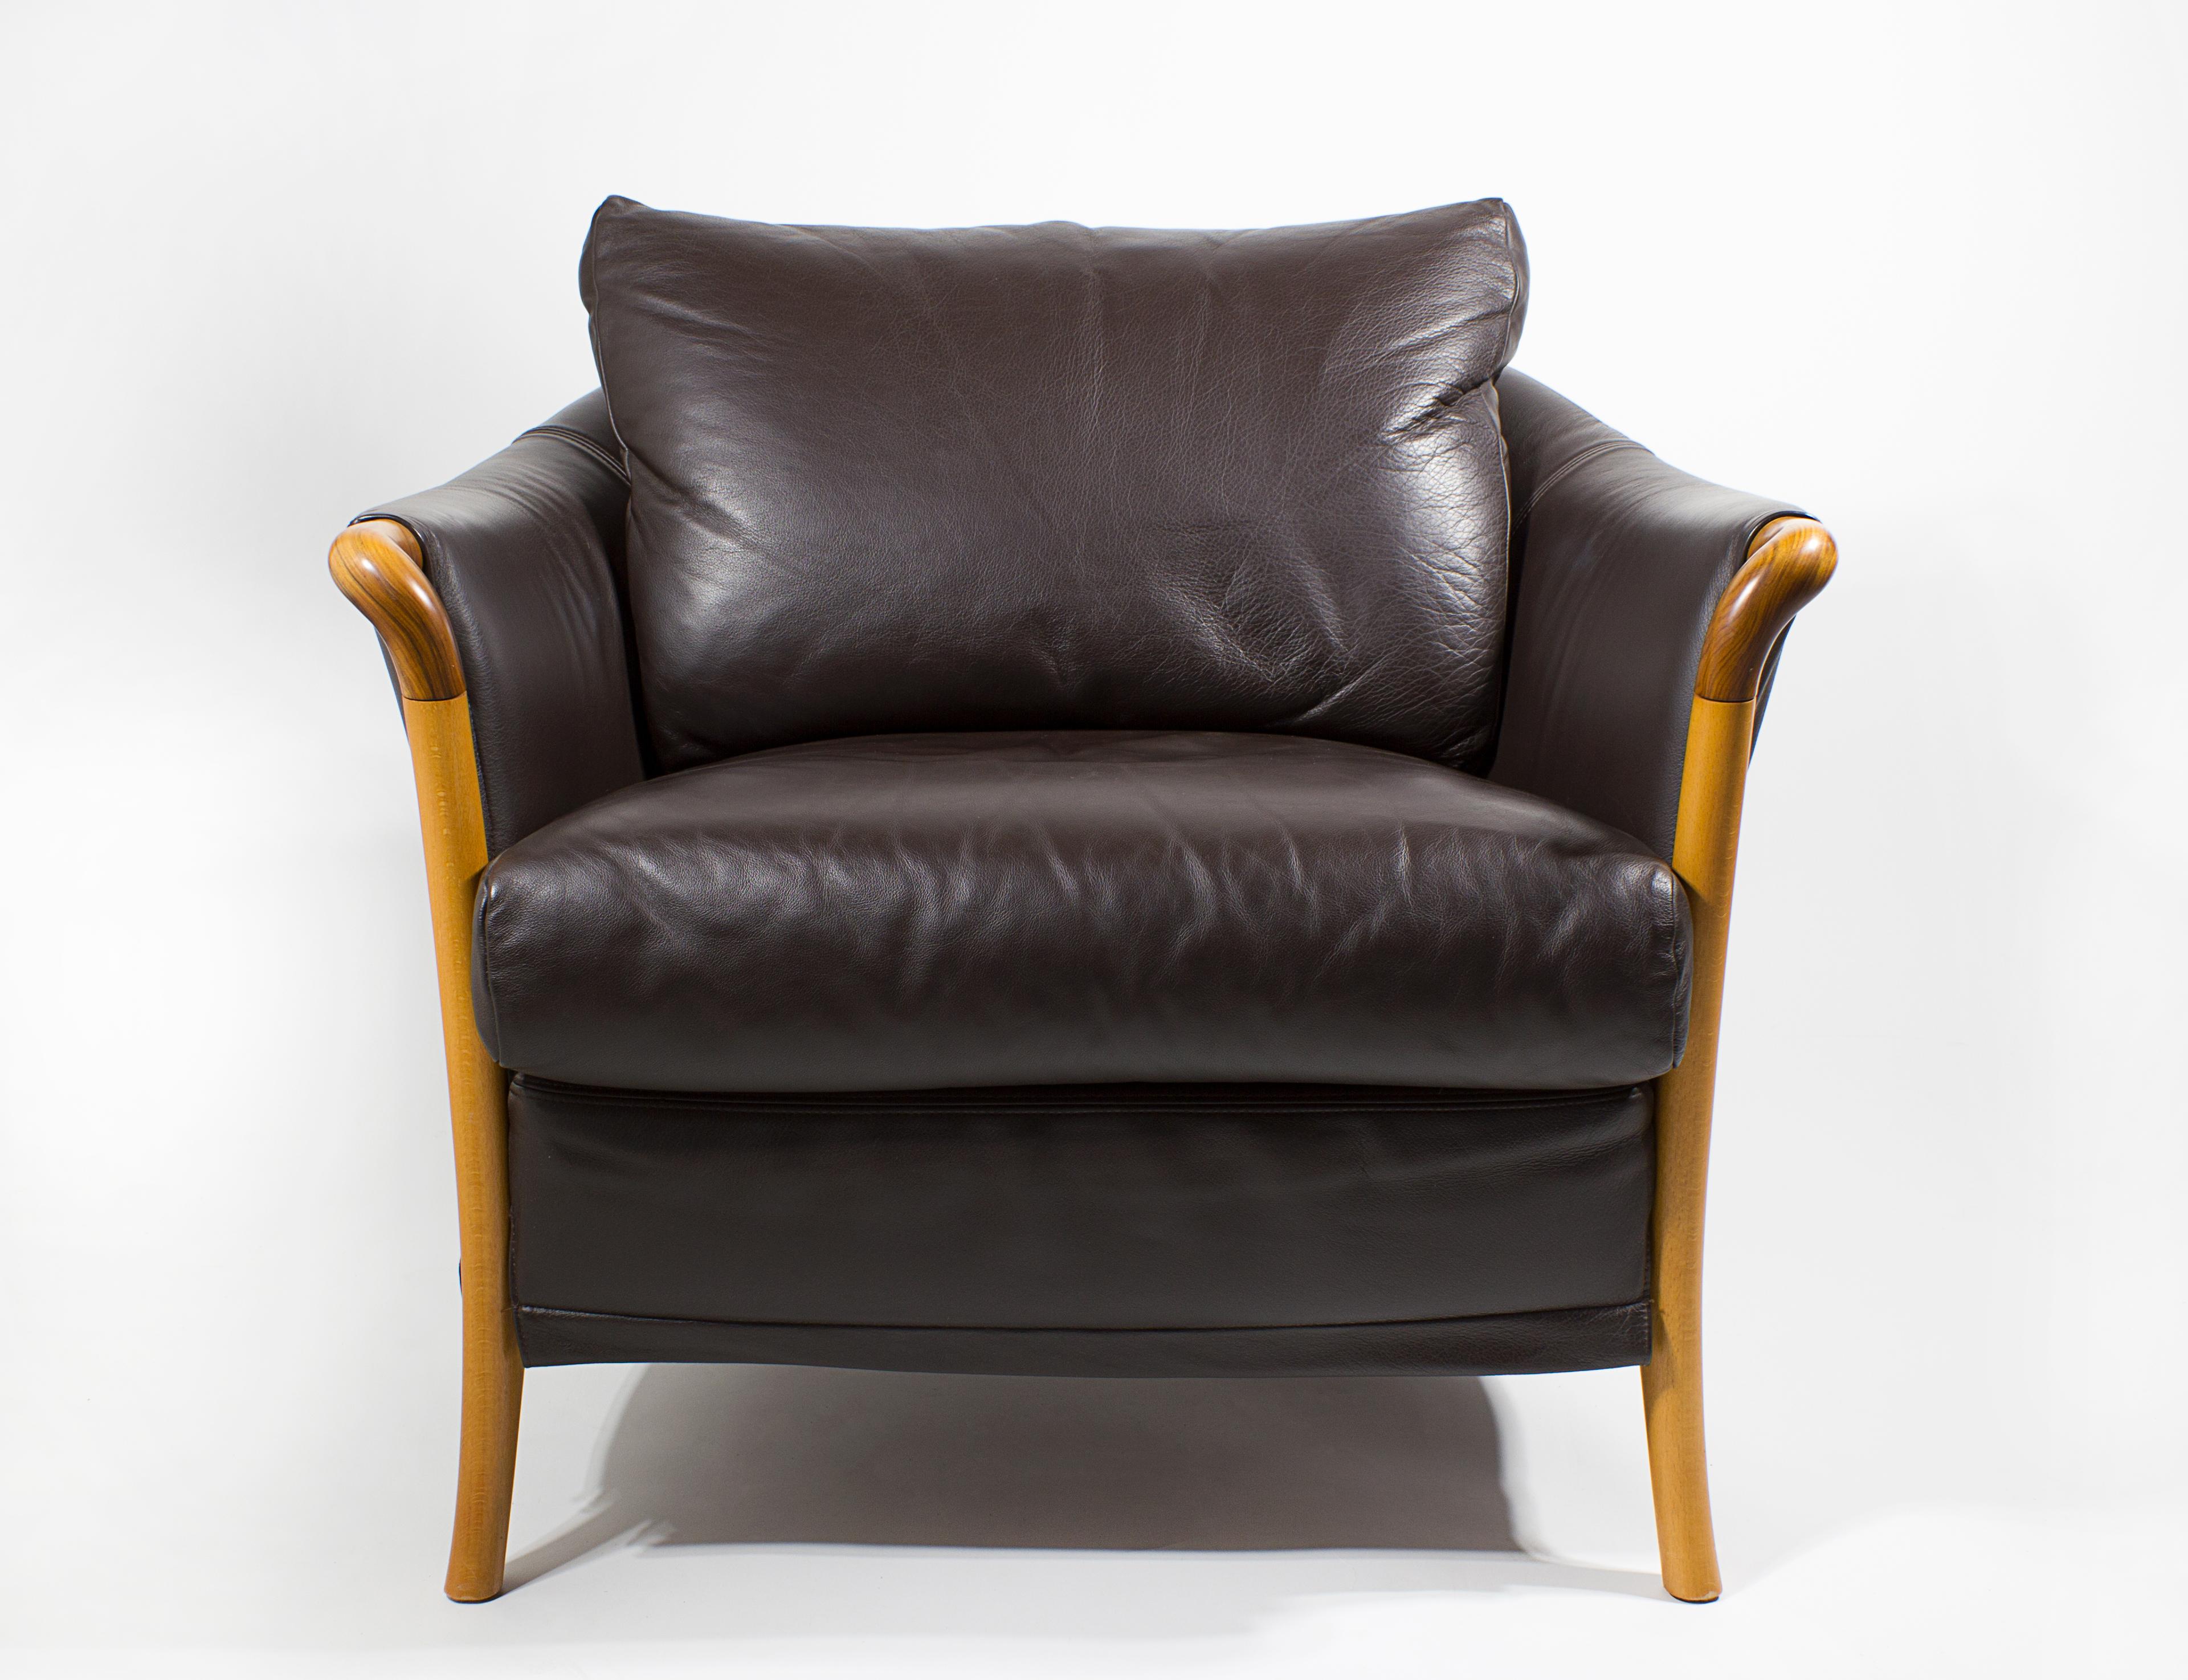 Italian Giorgetti Progetti Series 'Peggy' Lounge Chairs in Chocolate Brown Leather For Sale